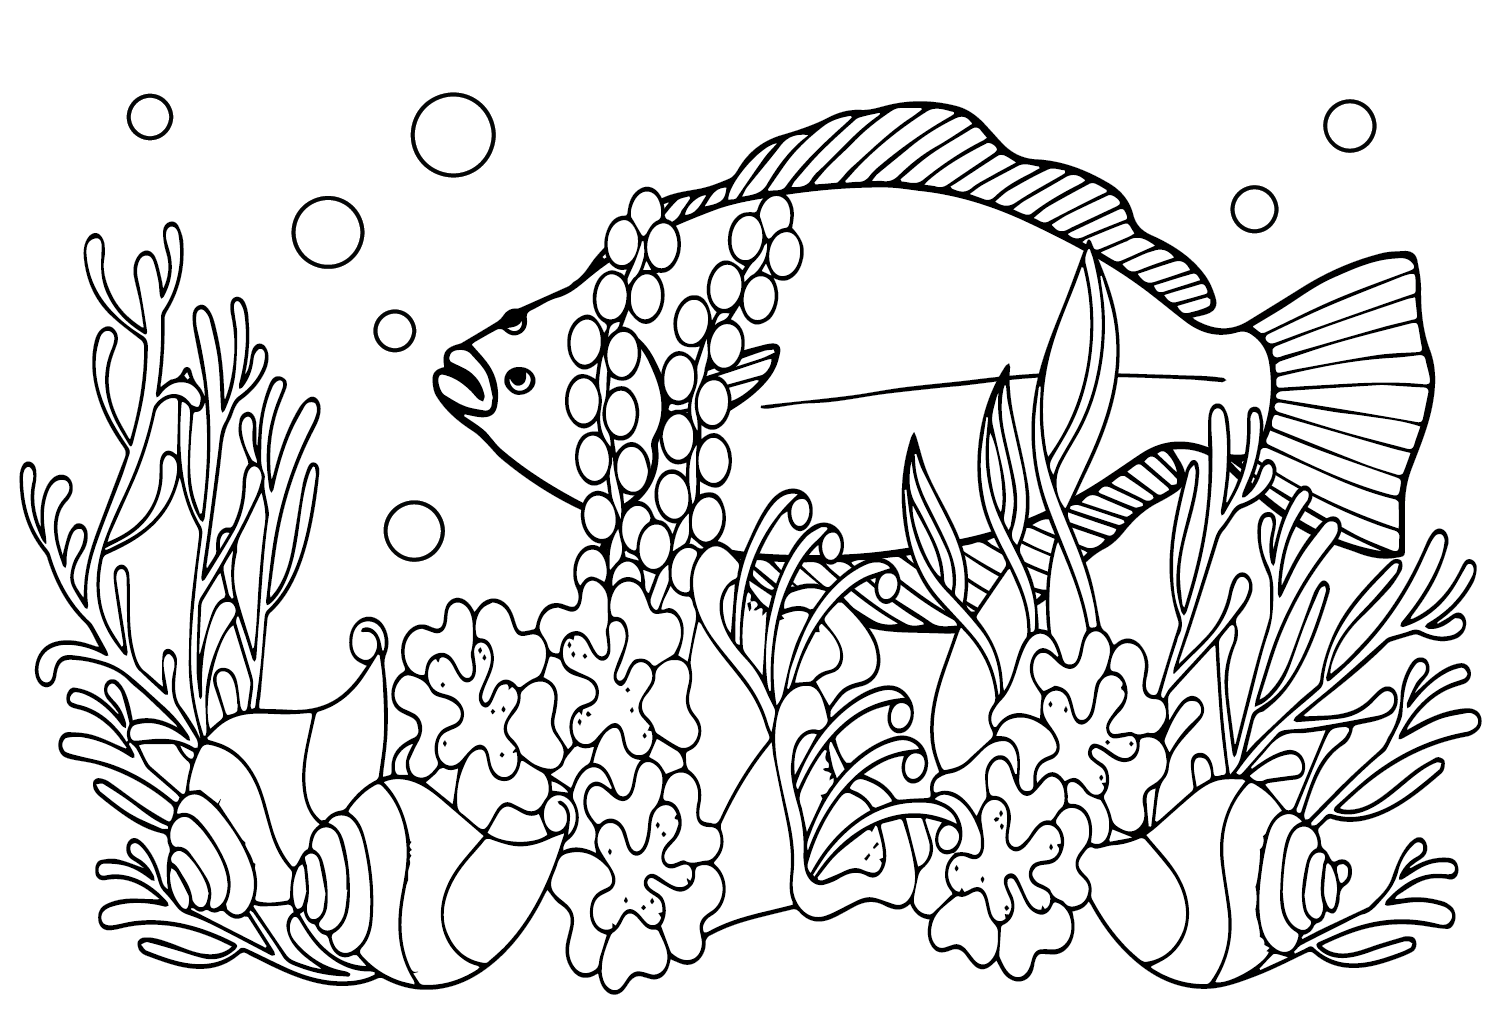 Free Printable Halibut Coloring Page - Free Printable Coloring Pages